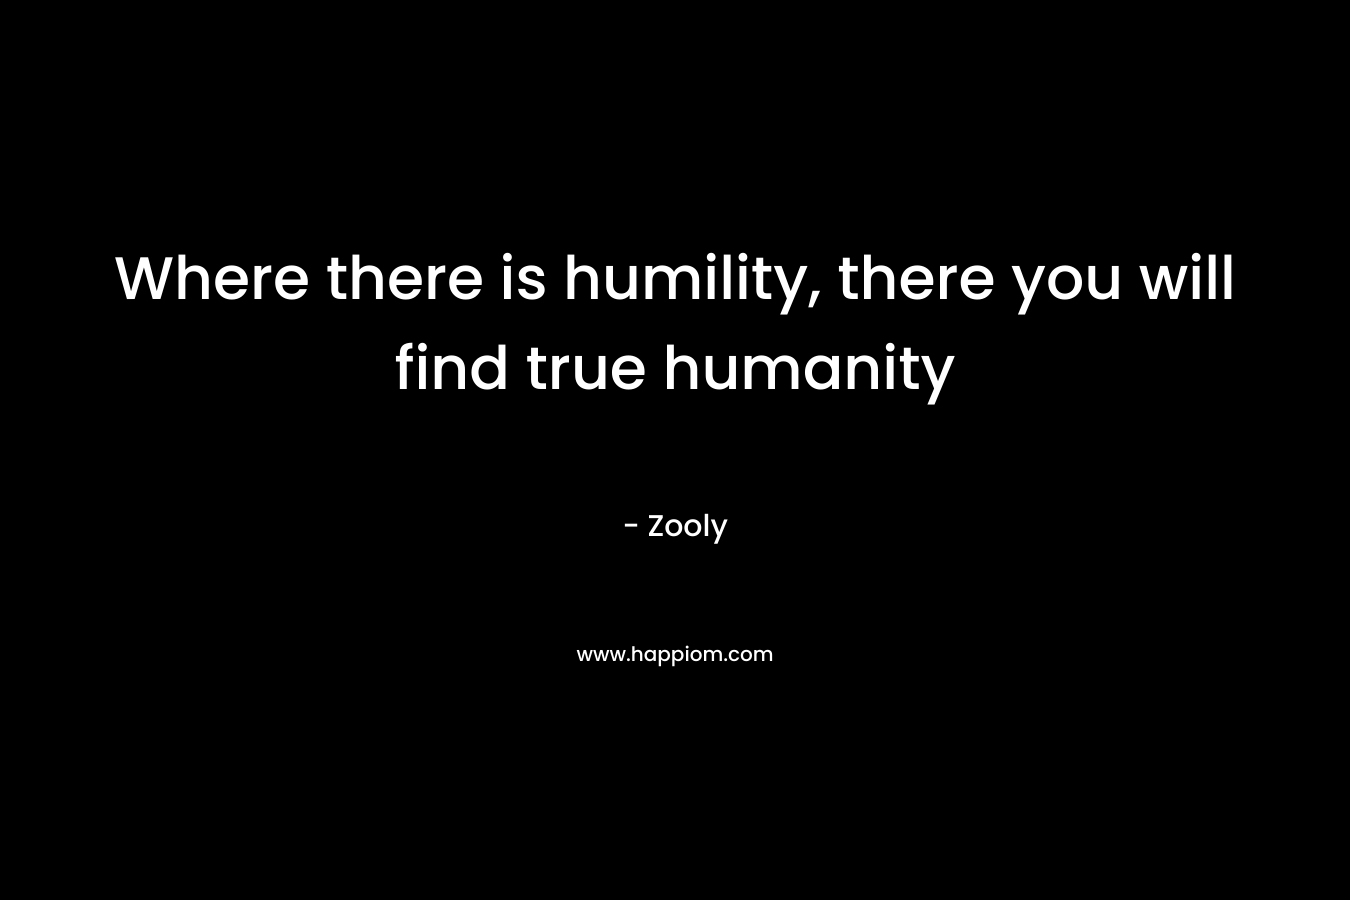 Where there is humility, there you will find true humanity